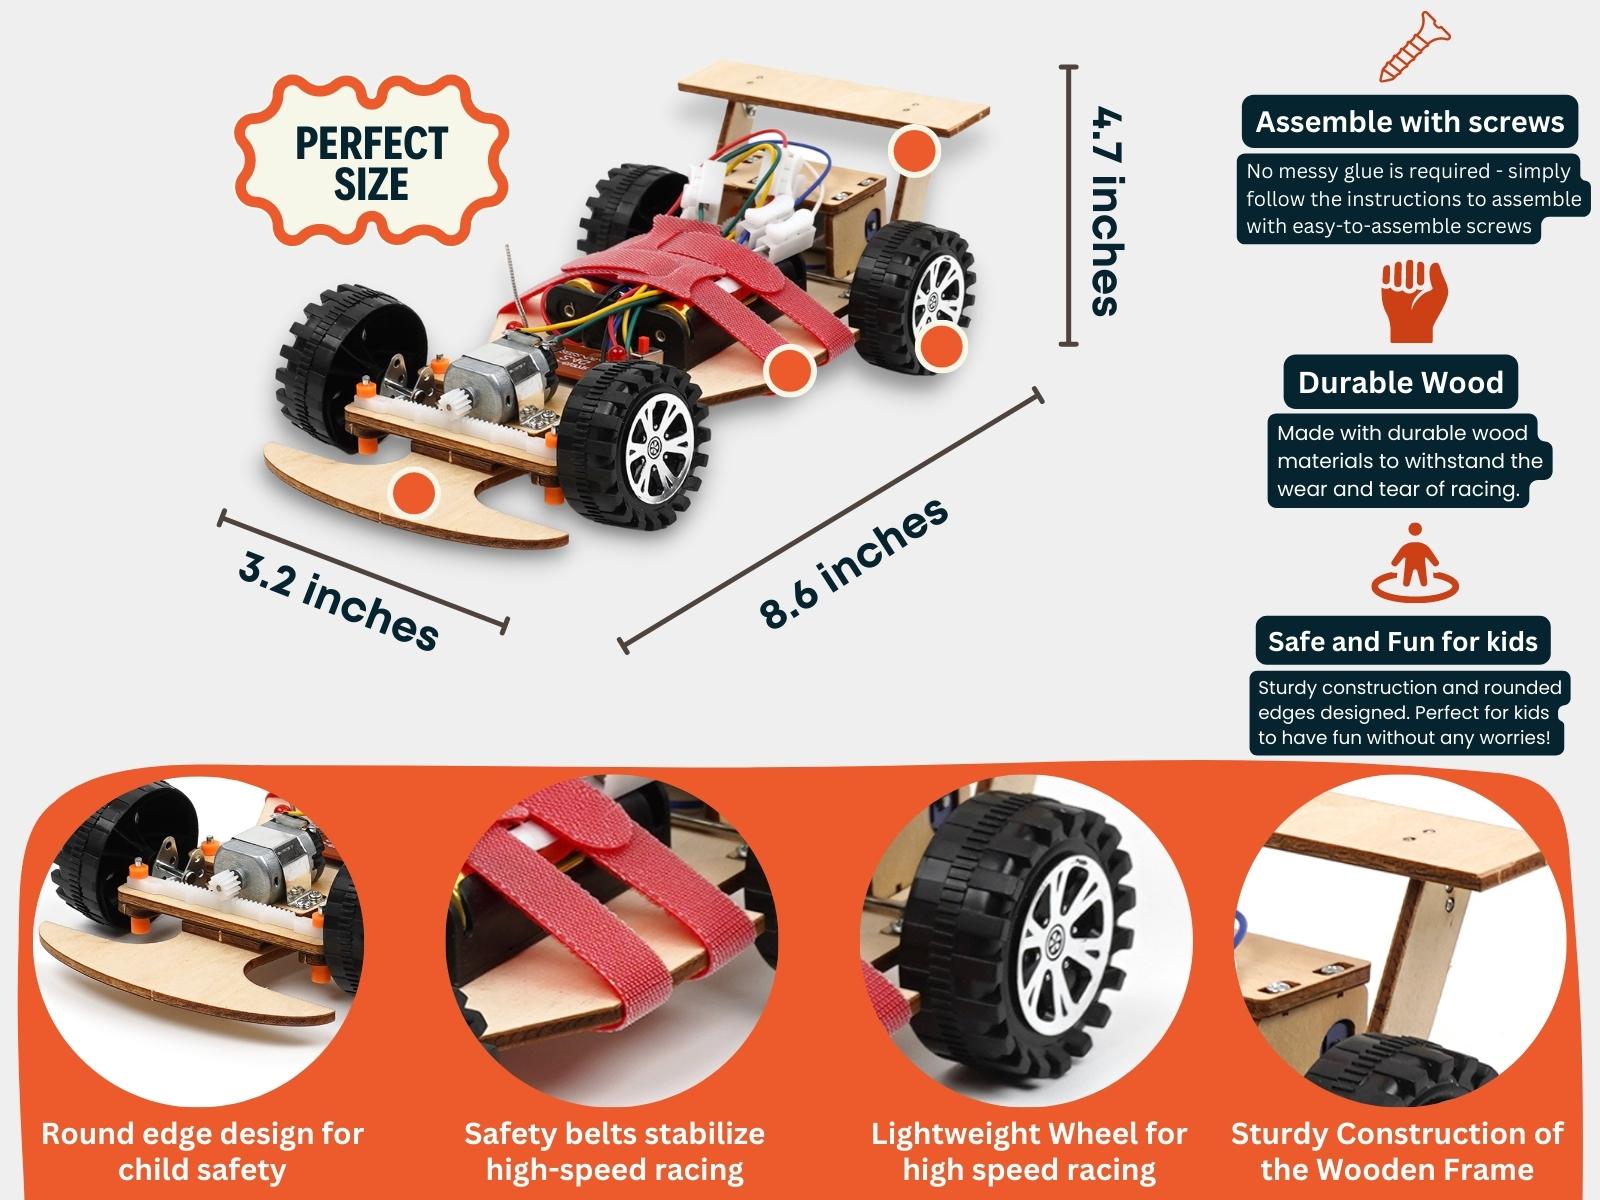 Wooden Solar Car Model Kits Educational Assembly Wireless Remote